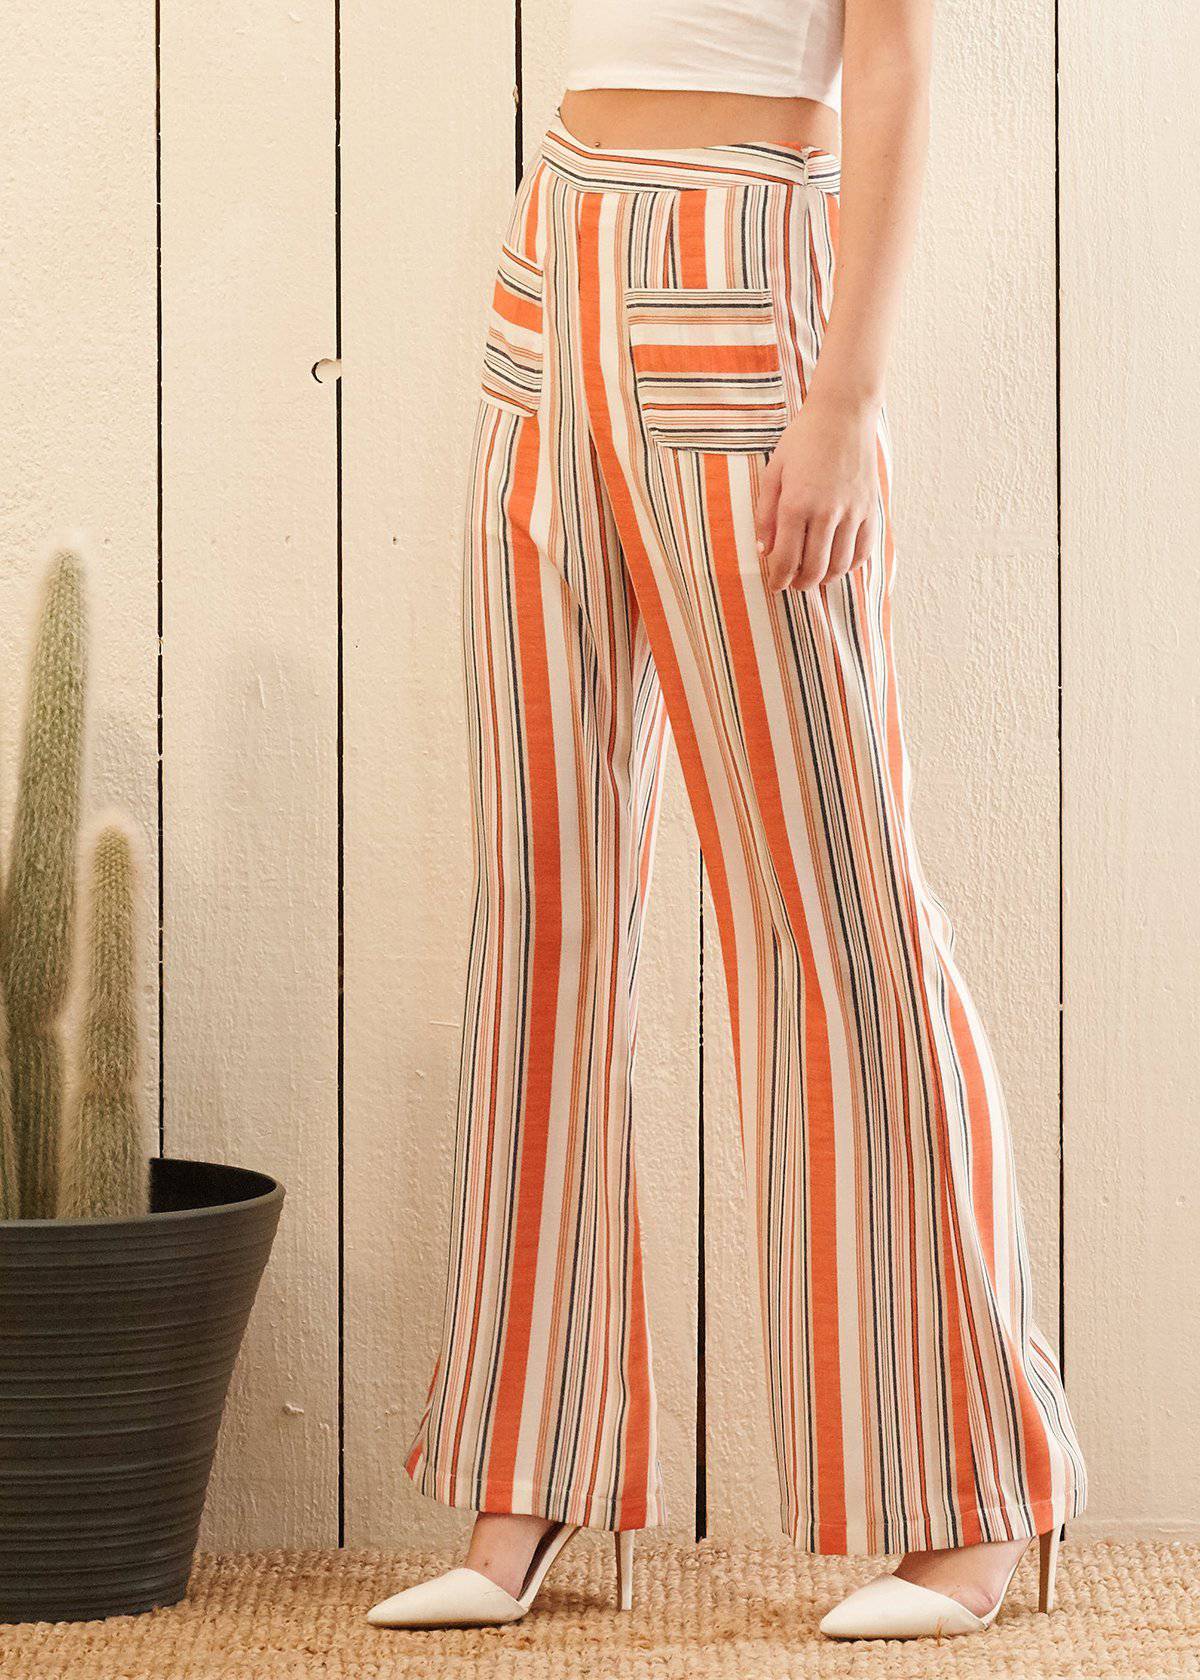 Women's Multi Stripe High-waisted Palazzo in Rust Multi by Shop at Konus